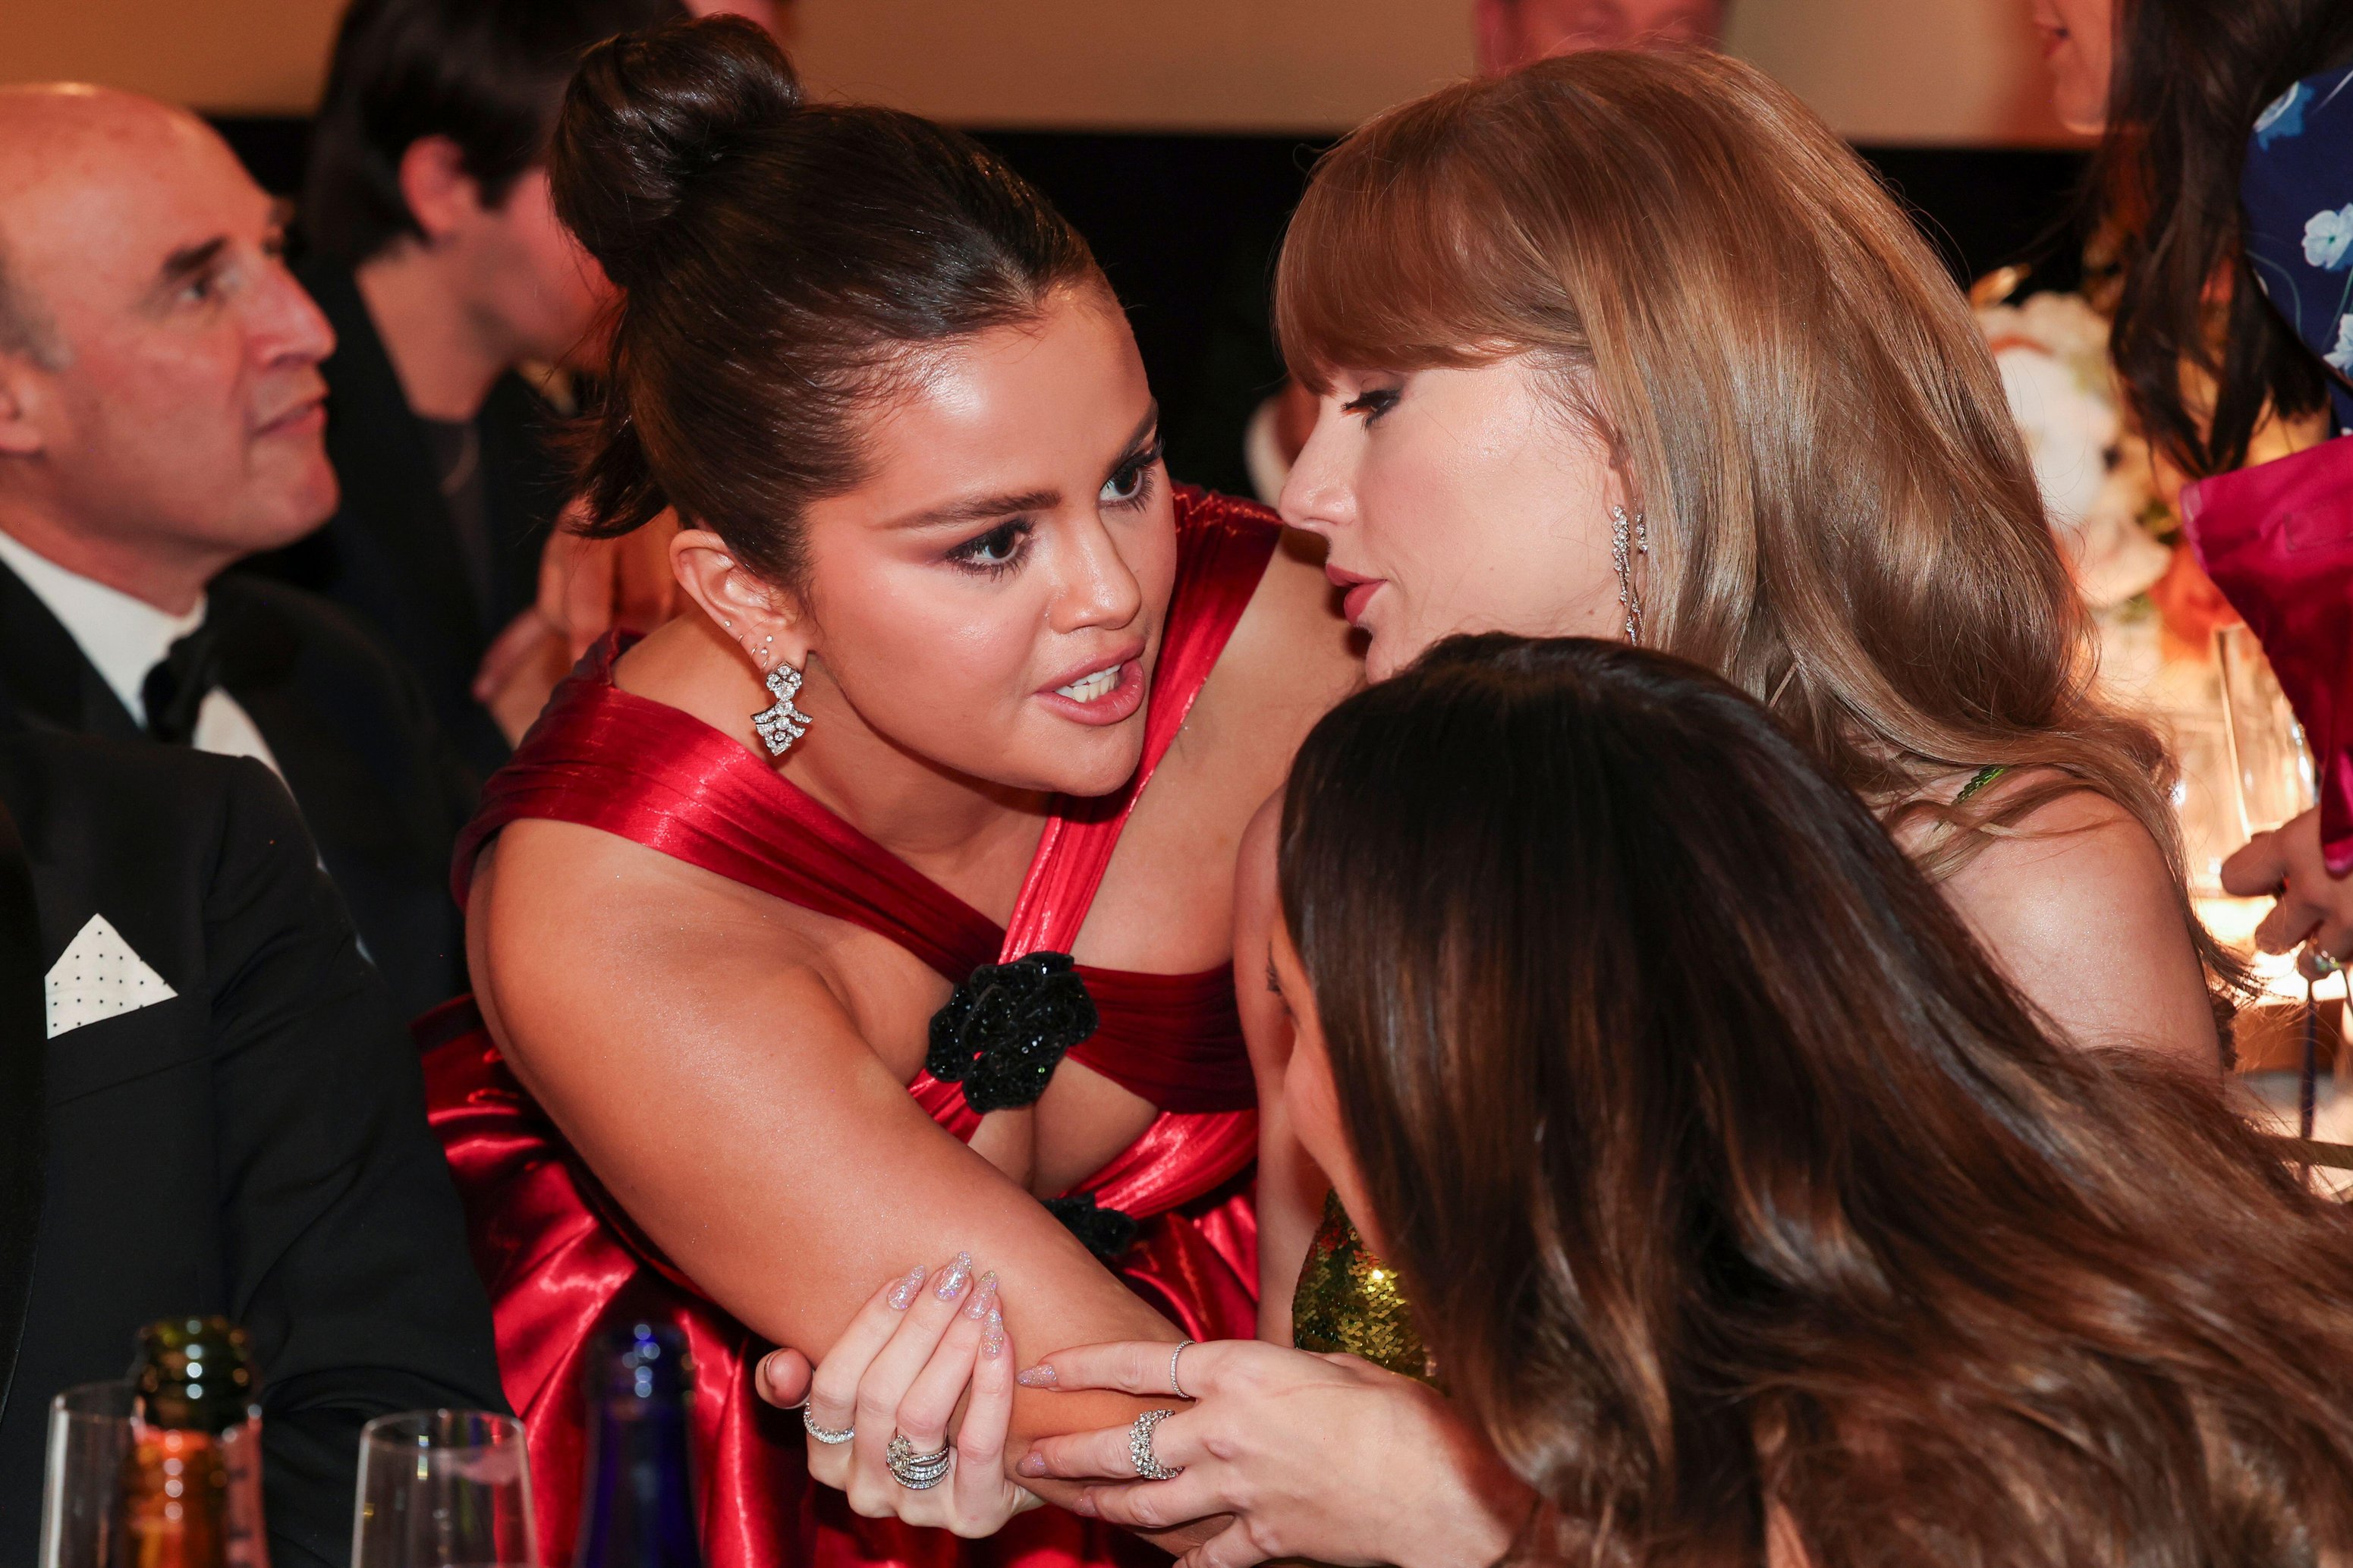 Selena Gomez and Taylor Swift are seen chatting at the Golden Globes